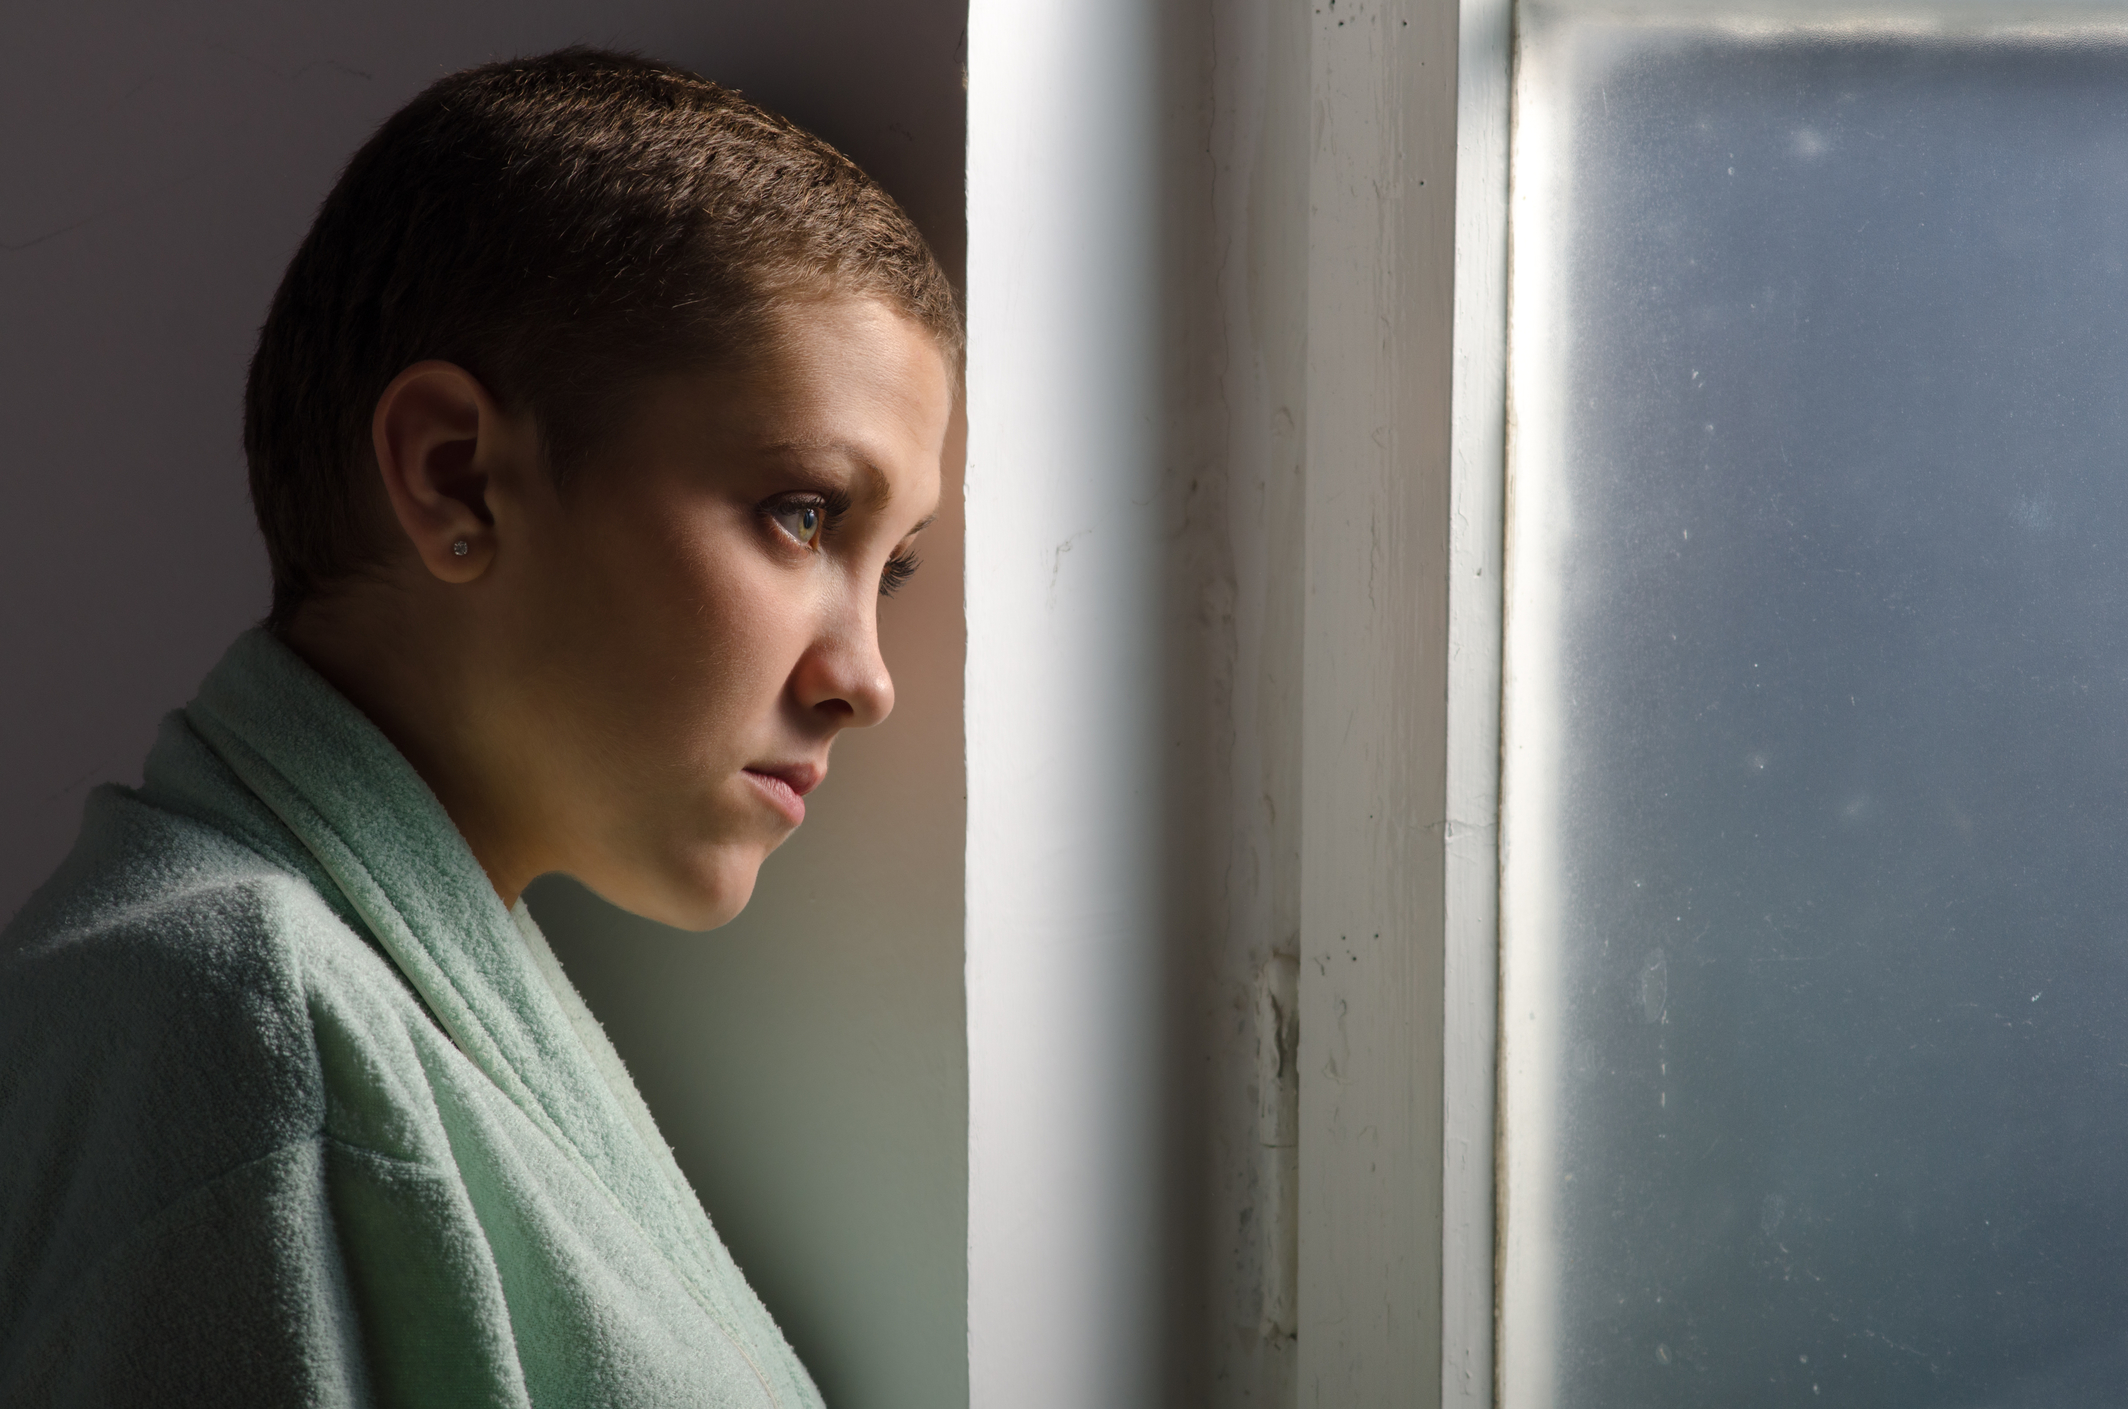 Young woman with shaven hair - cancer patient - looking sad